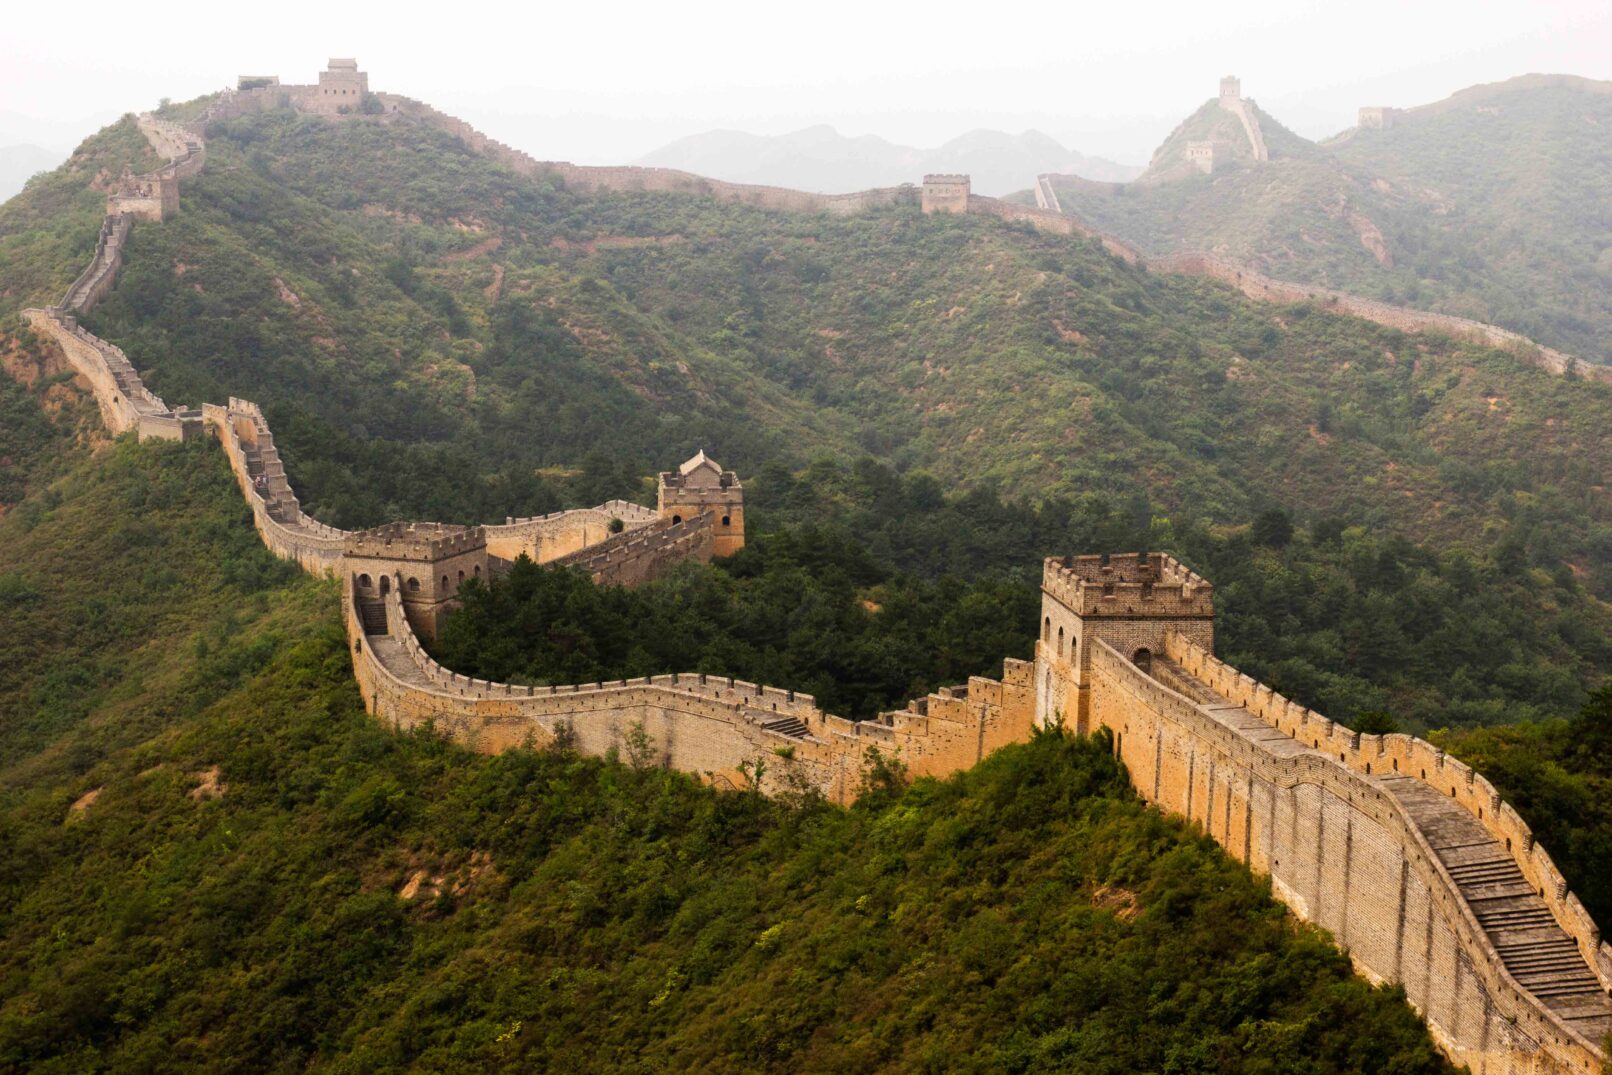 Great Wall in Jinshanling, Hebei province, China